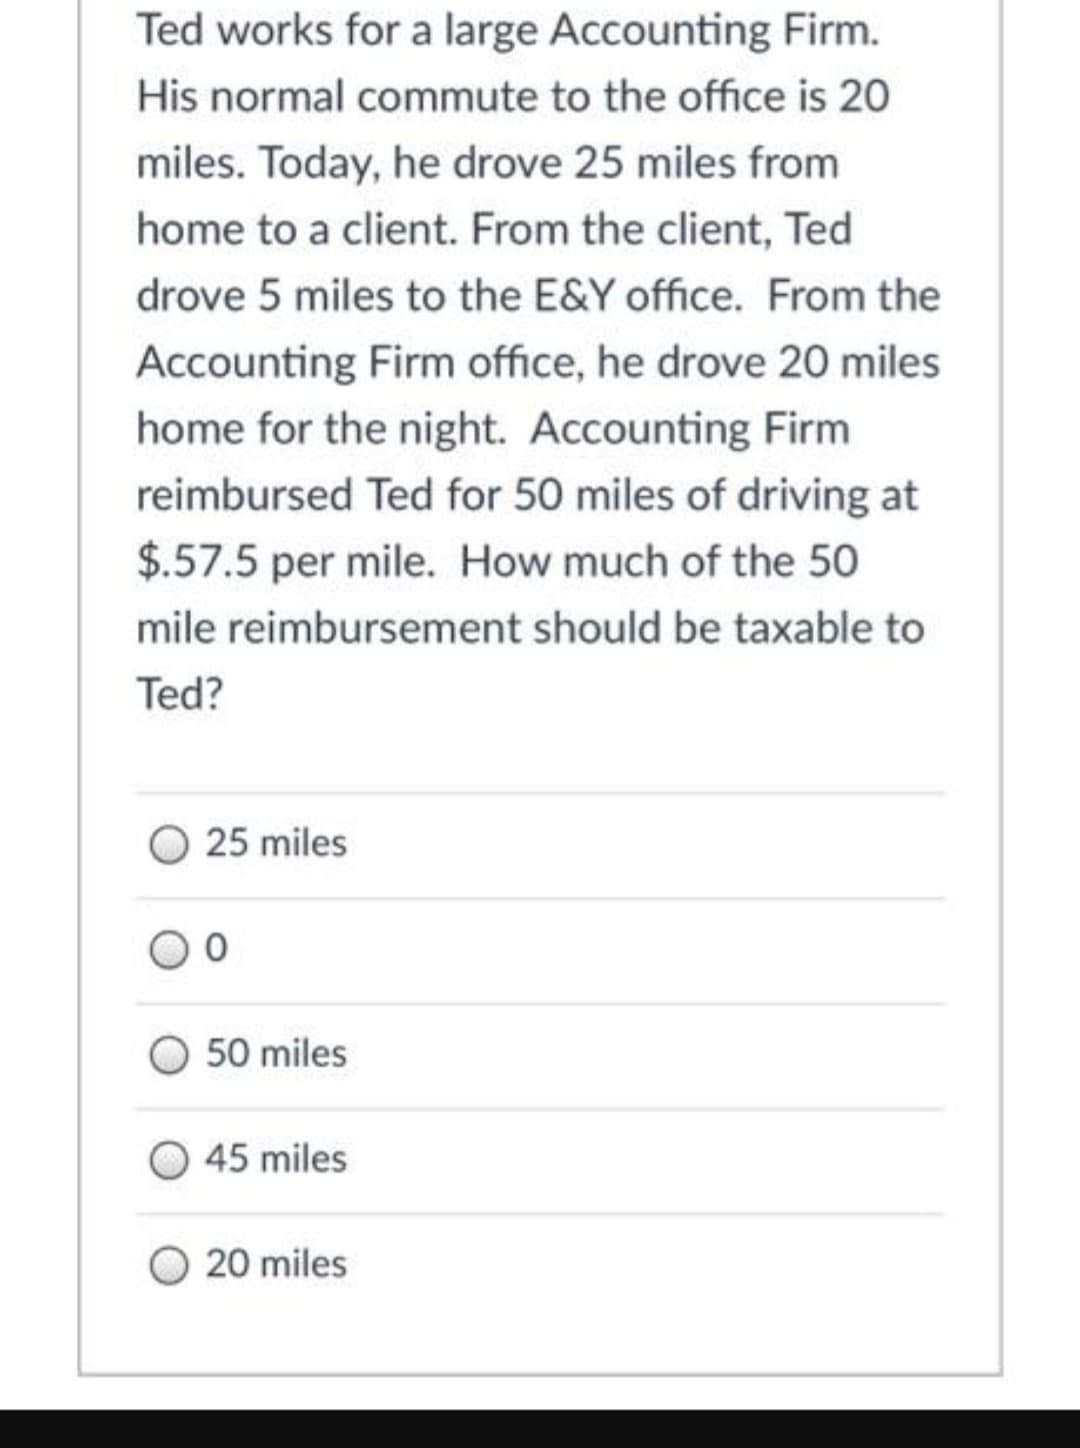 Ted works for a large Accounting Firm.
His normal commute to the office is 20
miles. Today, he drove 25 miles from
home to a client. From the client, Ted
drove 5 miles to the E&Y office. From the
Accounting Firm office, he drove 20 miles
home for the night. Accounting Firm
reimbursed Ted for 50 miles of driving at
$.57.5 per mile. How much of the 50
mile reimbursement should be taxable to
Ted?
25 miles
50 miles
45 miles
20 miles
